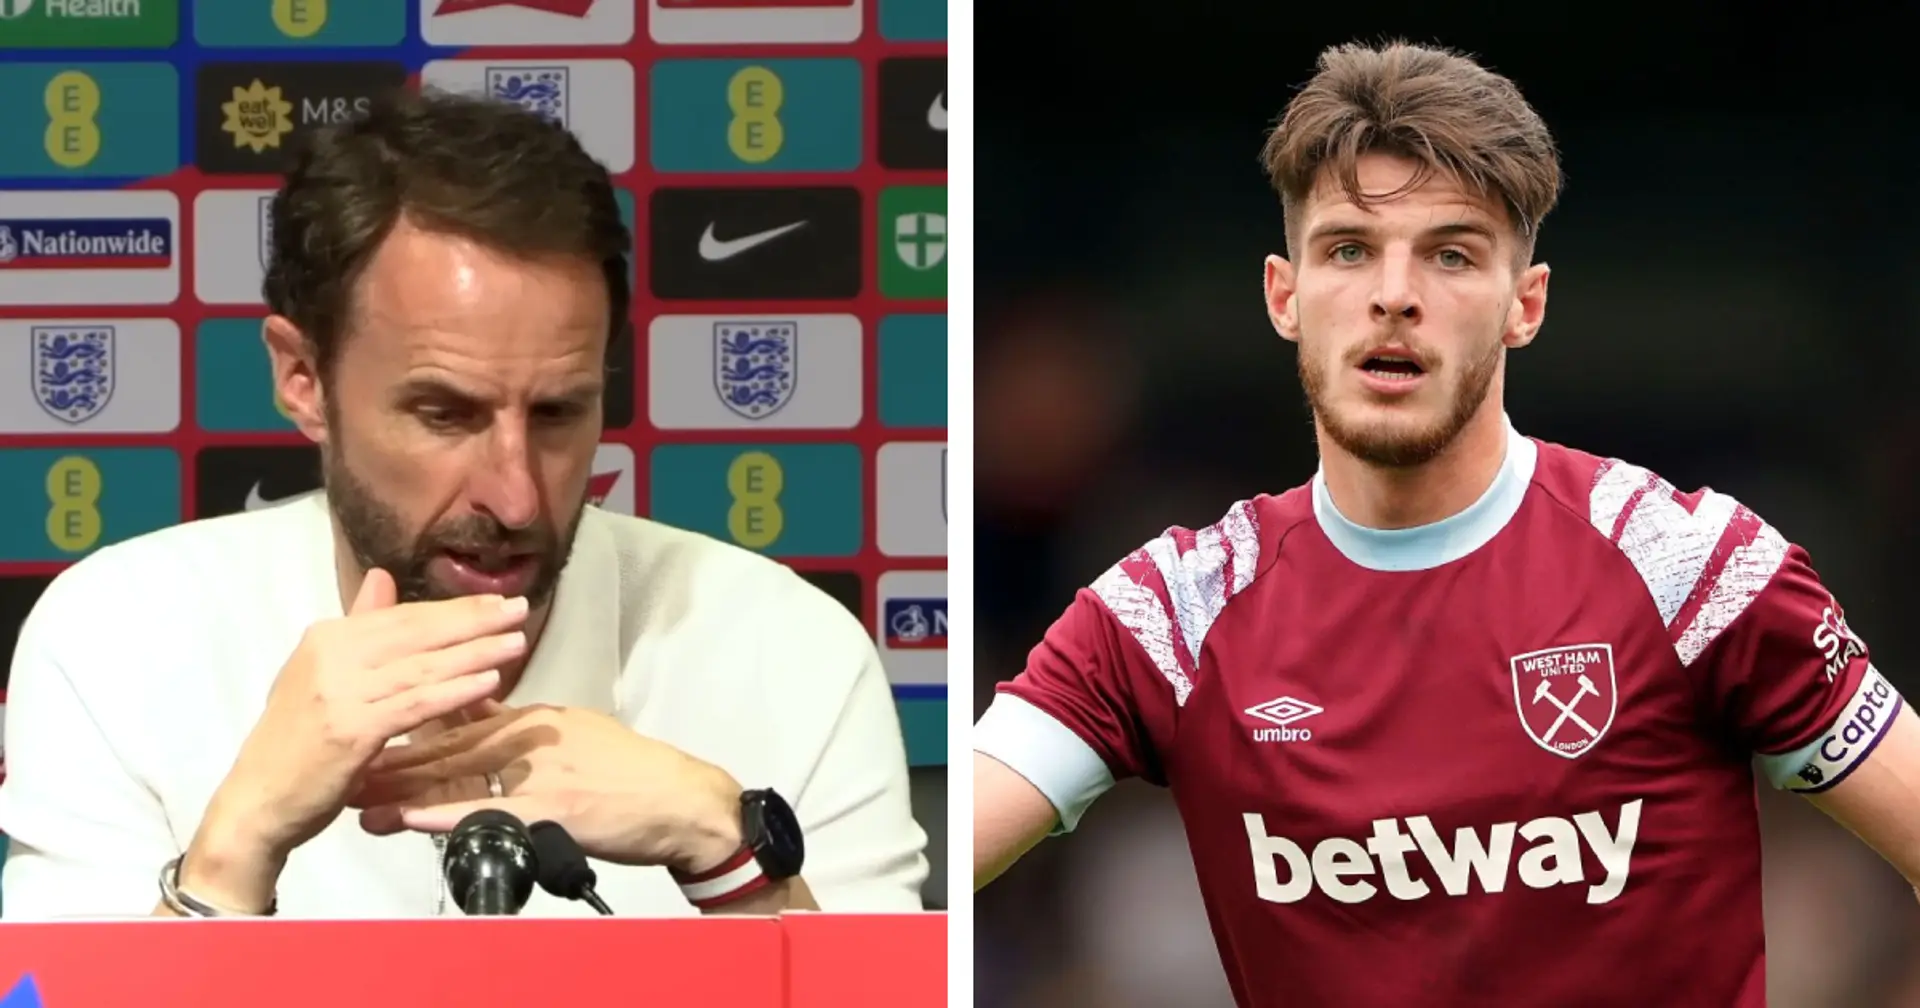 'Every move comes with risk': Southgate sends warning to Declan Rice ahead of Arsenal transfer